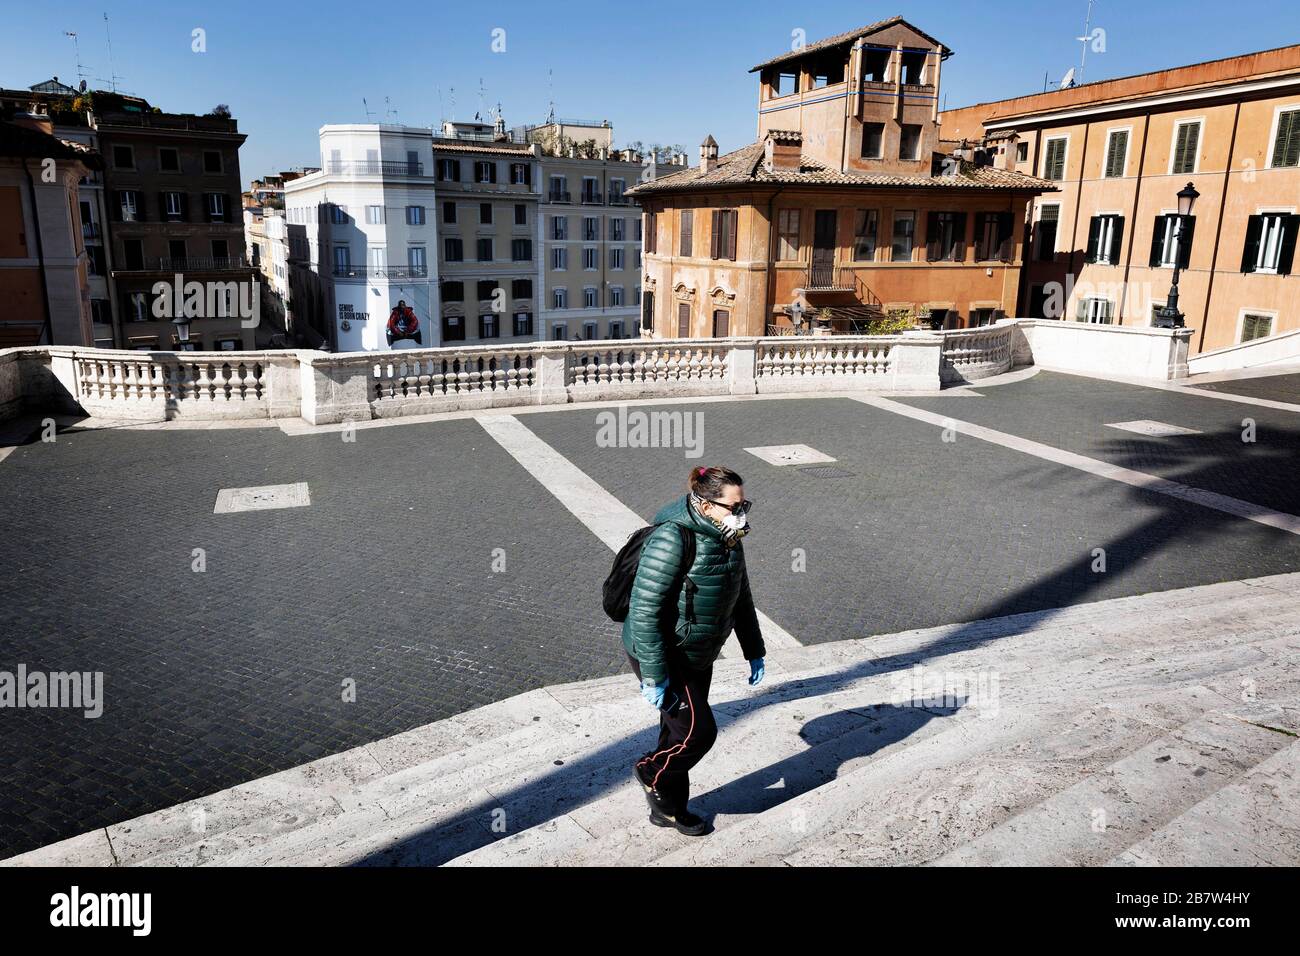 Rome, Italy. 18th Mar, 2020. Coran Virus, COD-19, emergency in the streets of Roma.The Italian Government has adopted the measure of a national lockout by closing all activities, except for essential services in an attempt to fight Coronavirus (COVID-19) .All the city, as all the whole country, is under quarantine and the movement are restricted to the necessary. The streets of the city are empty and controled by the amry. Credit: Matteo Trevisan/ZUMA Wire/Alamy Live News Stock Photo